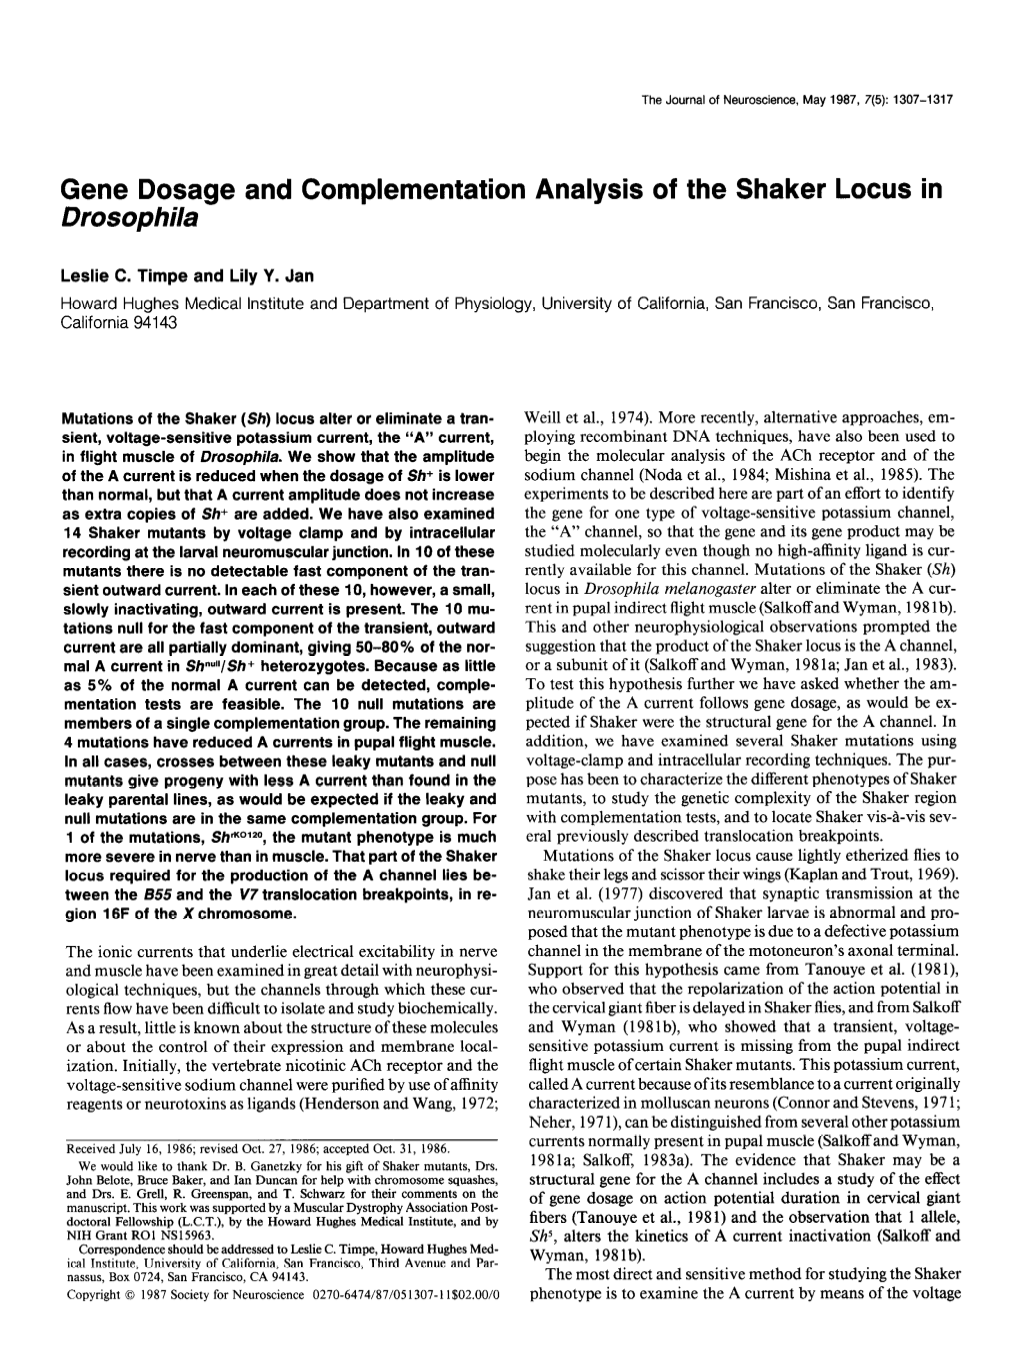 Gene Dosage and Complementation Analysis of the Shaker Locus in Drosophila